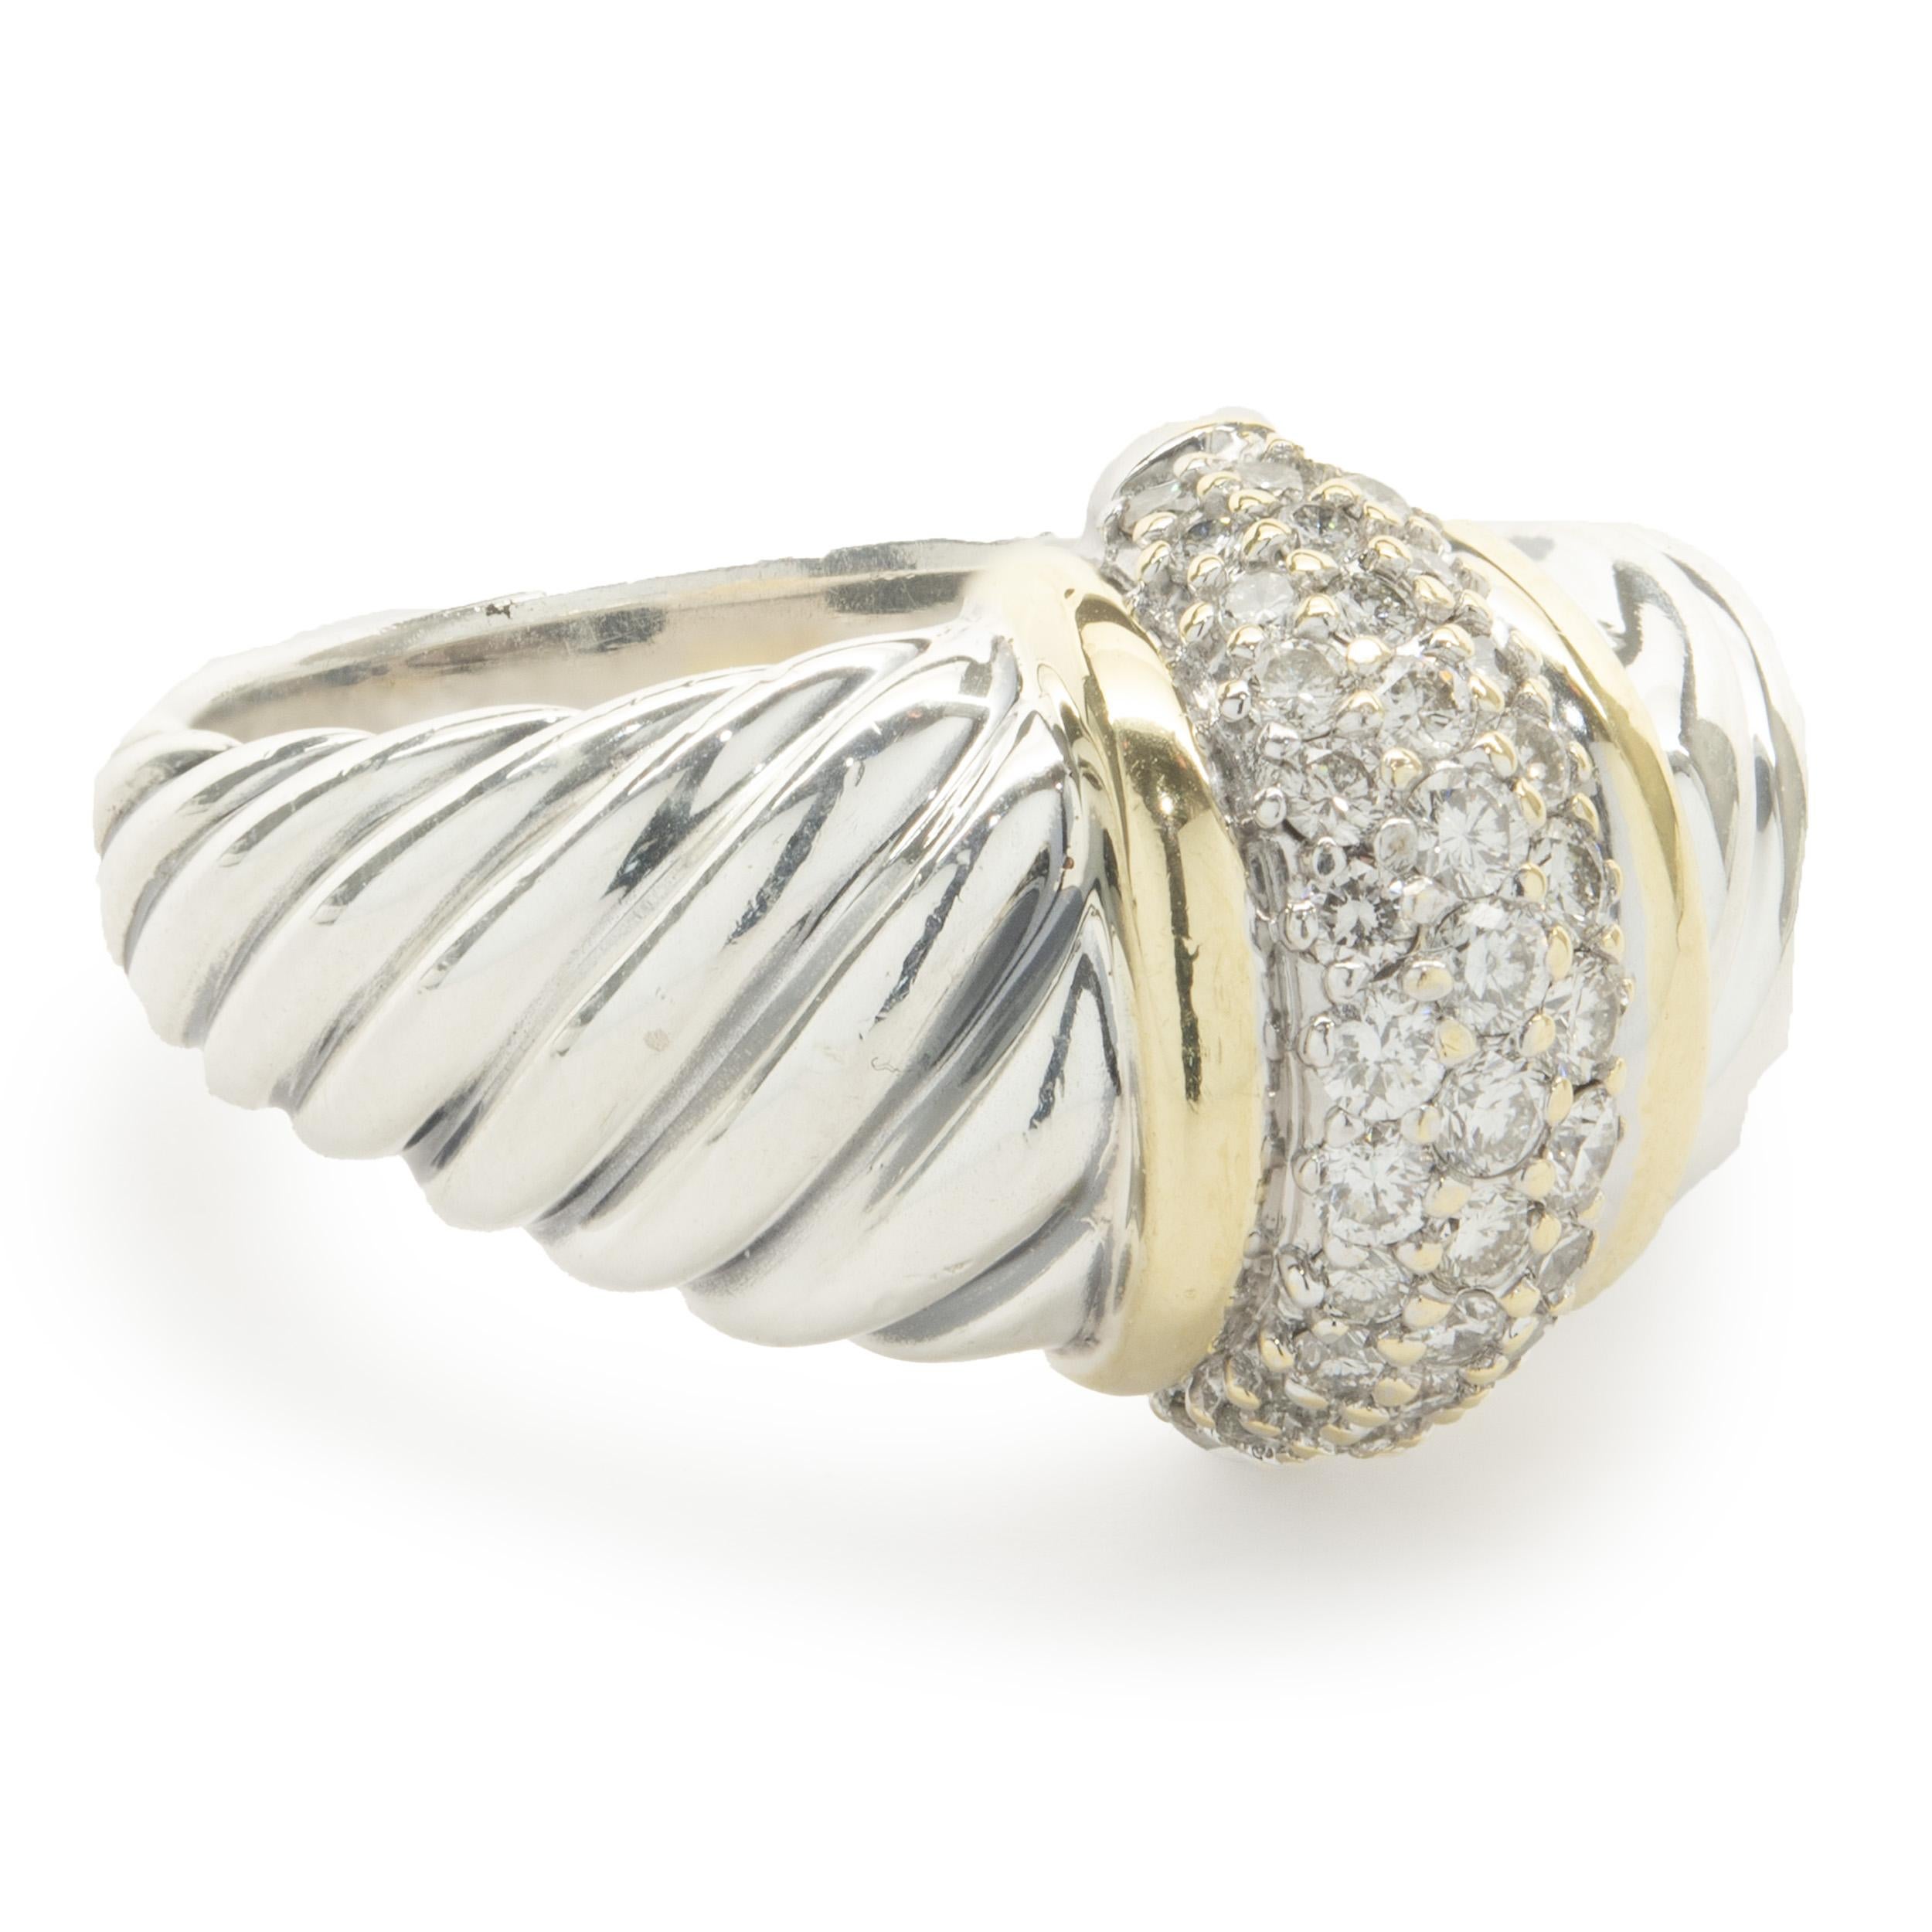 Designer: David Yurman
Material: Sterling Silver / 18K yellow gold
Diamond:  36 round brilliant cut = 0.36cttw
Color: G
Clarity: SI1
Size: 9
Dimensions: ring top measures 14.70mm wide
Weight: 10.47 grams